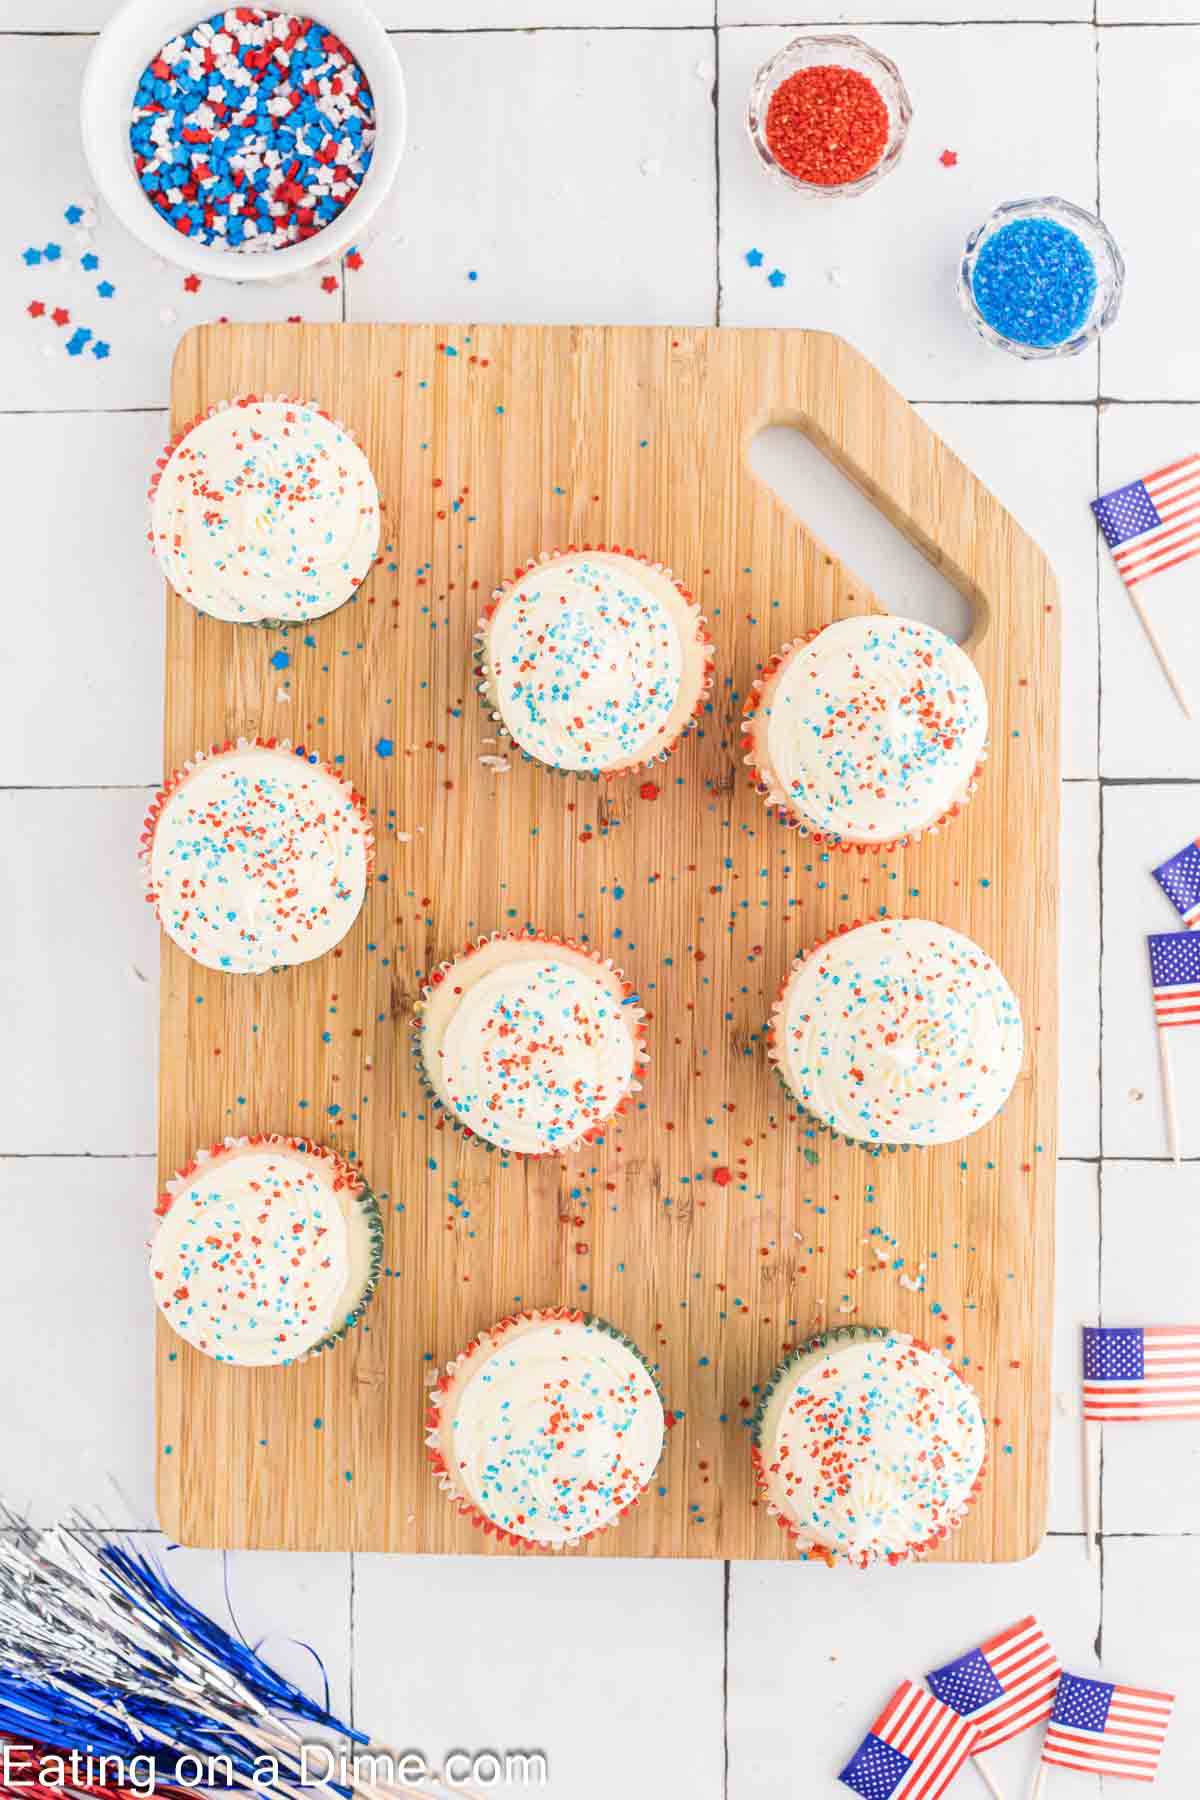 A wooden cutting board holds nine Firecracker Cupcakes topped with white frosting and red, white, and blue sprinkles. The table has bowls of sprinkles and American flags. The scene has a festive, patriotic theme.